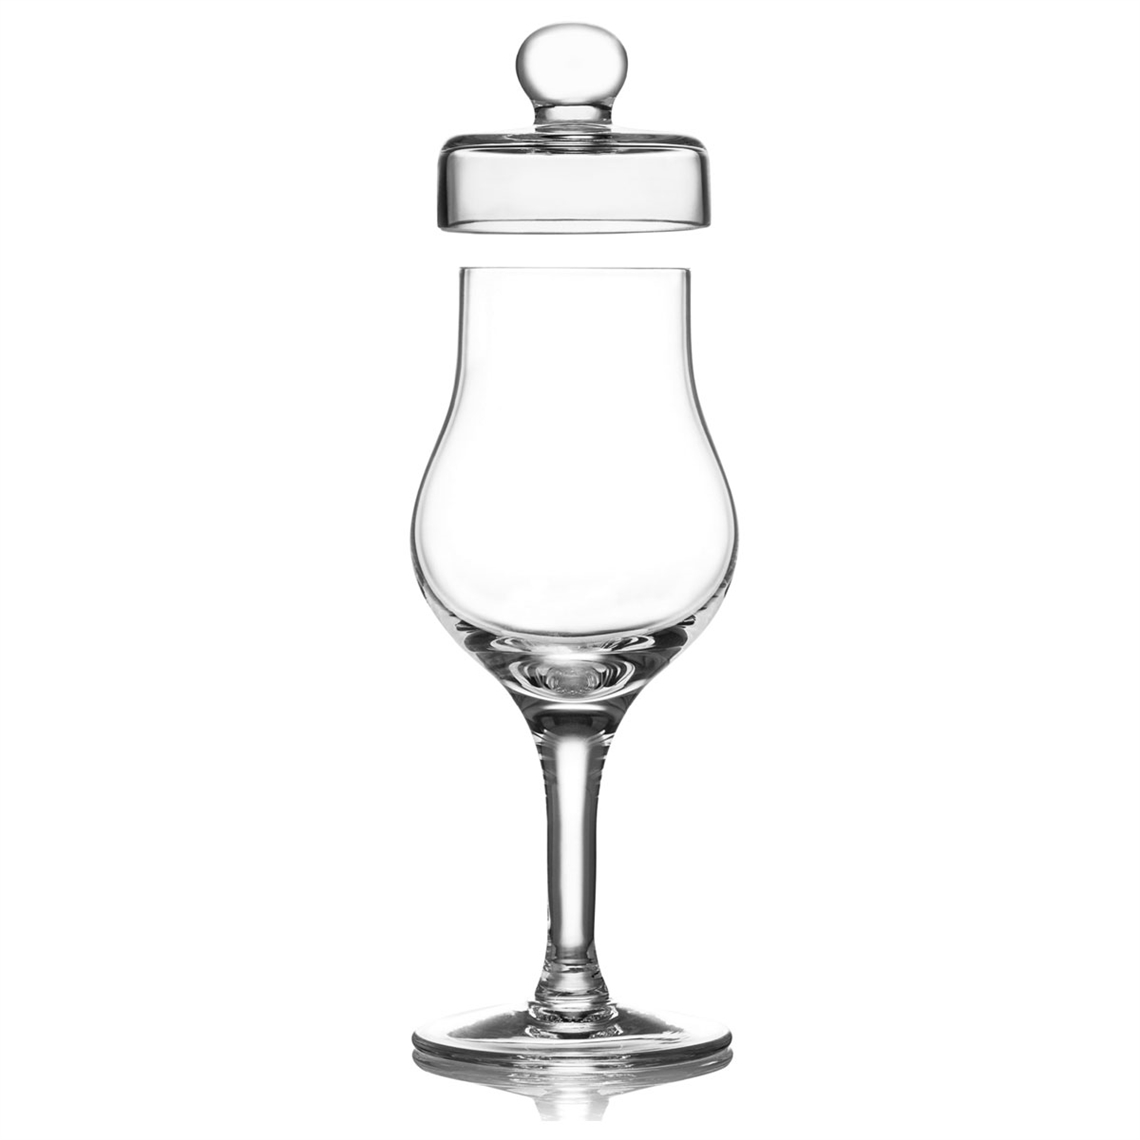 Amber Glass Whisky Tasting Glass with Cap - G100